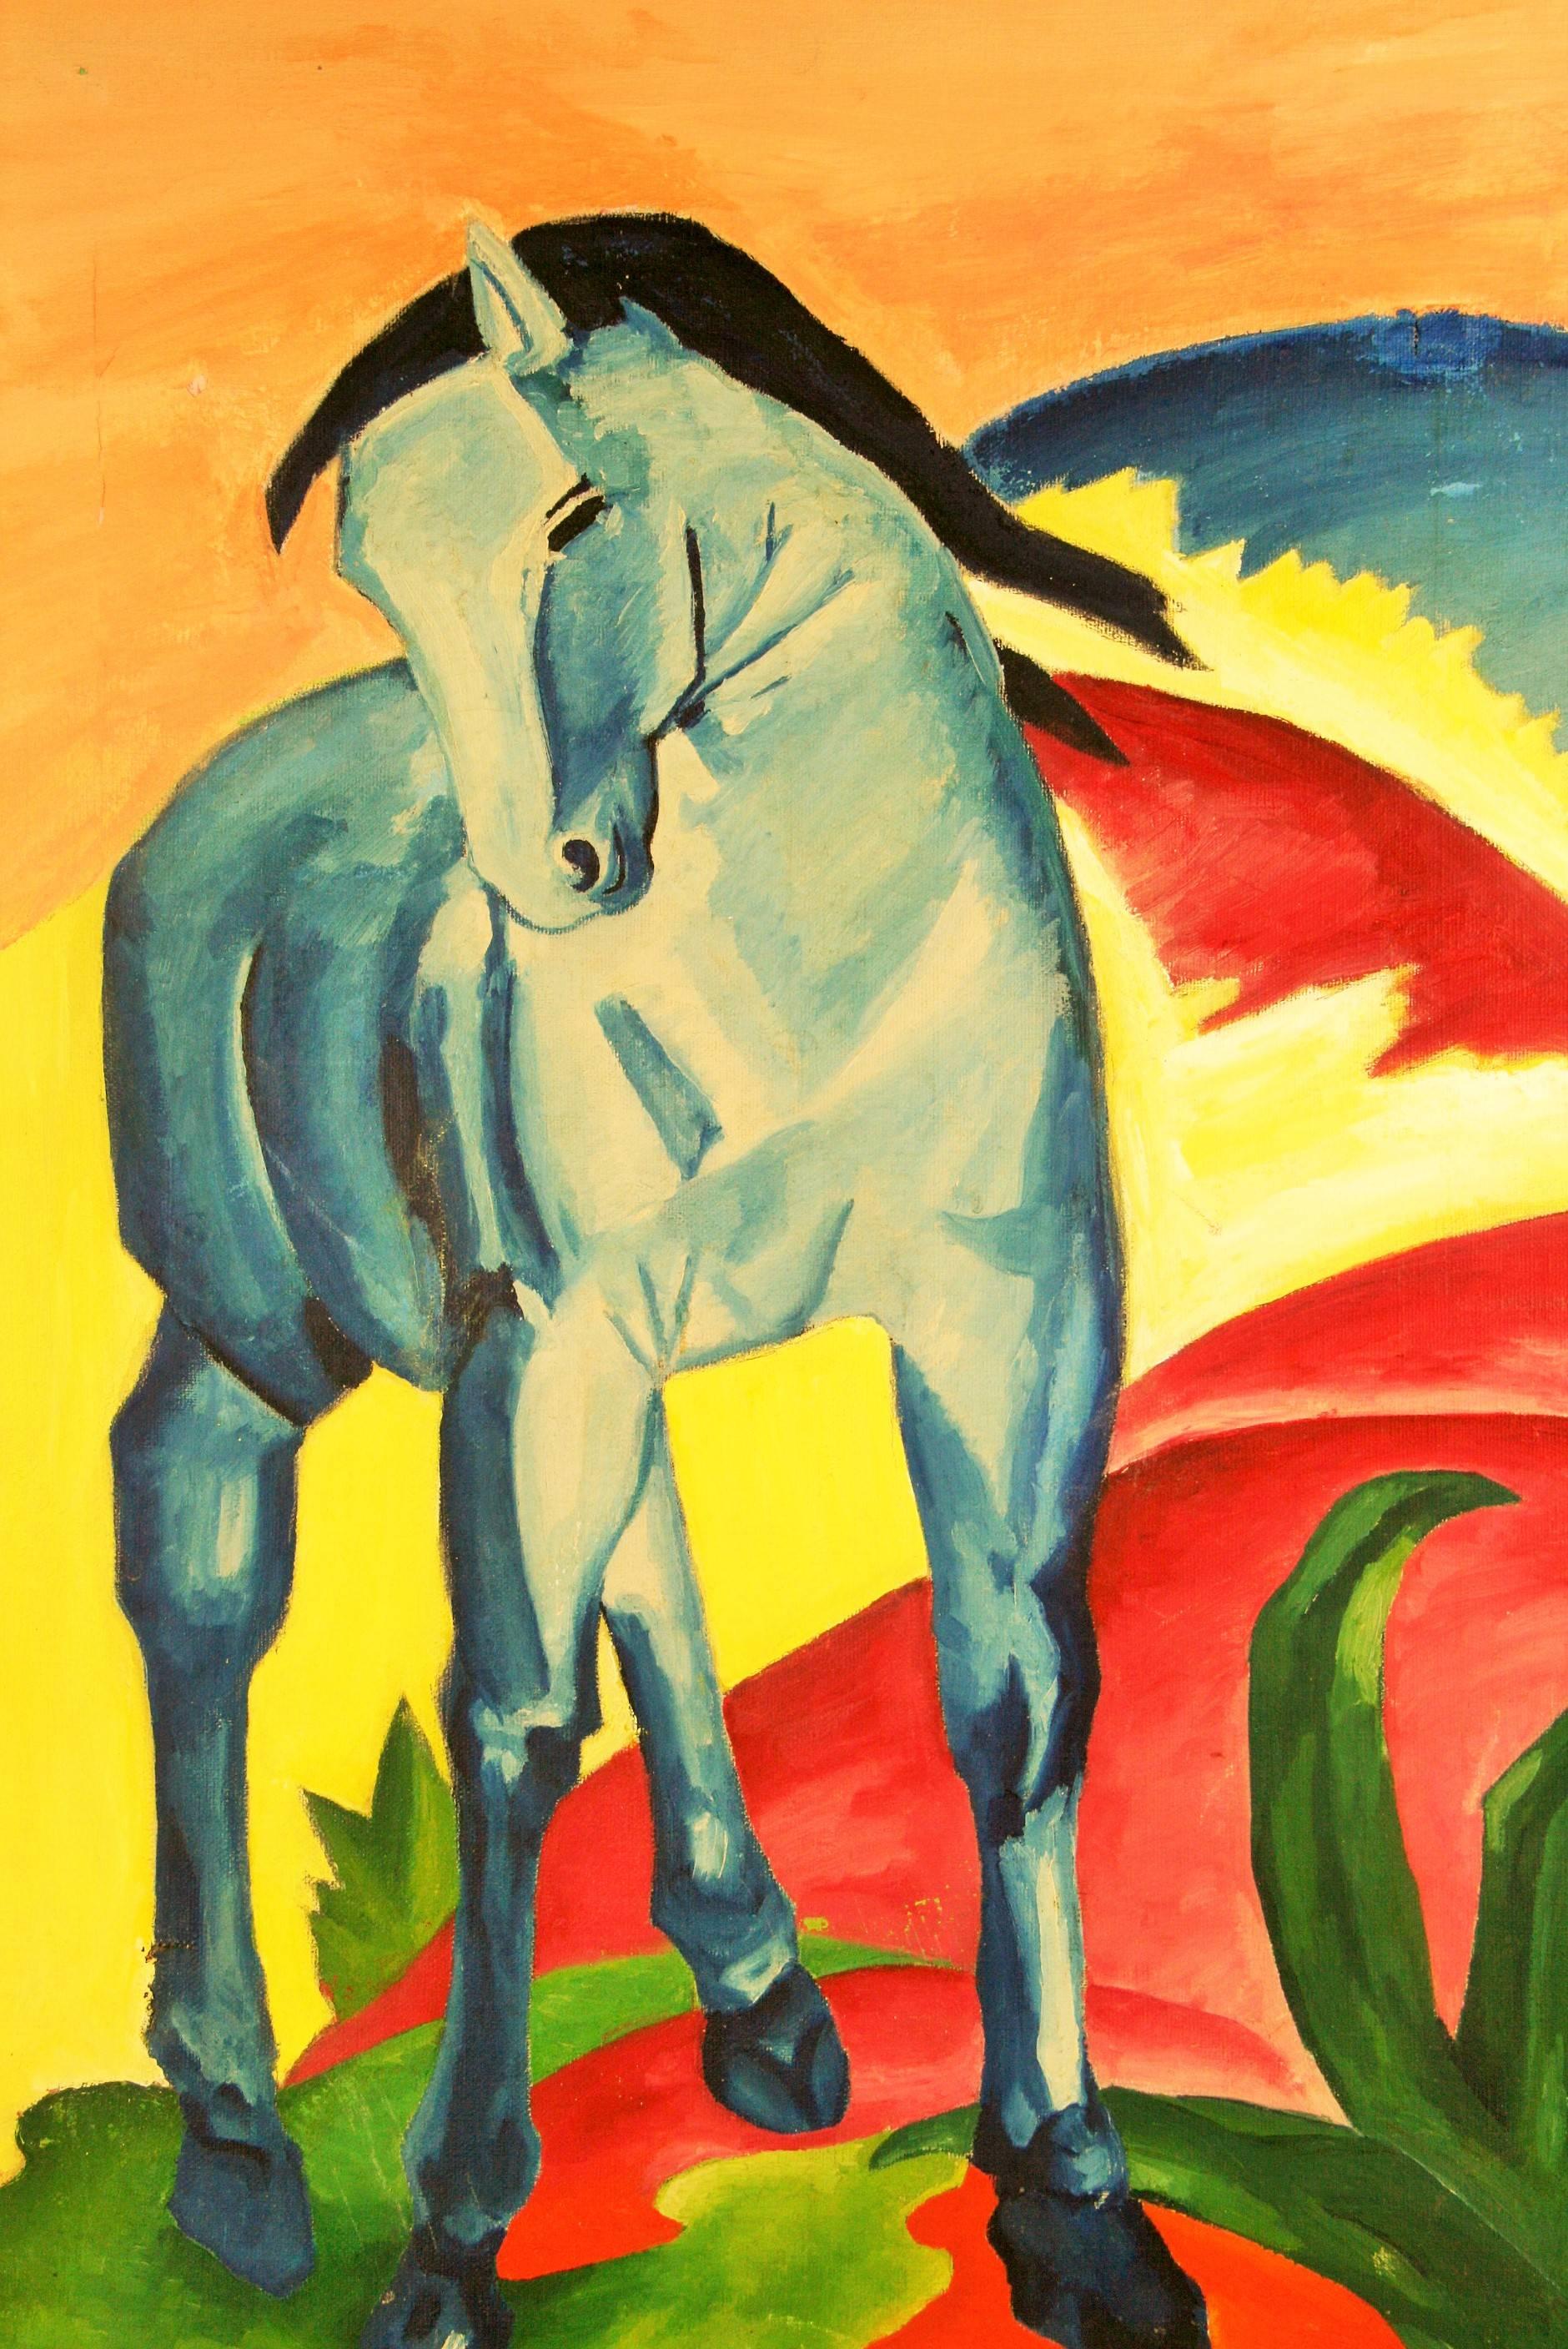 Blue Horse by J. Knopf - Abstract Impressionist Painting by Jay Knopf